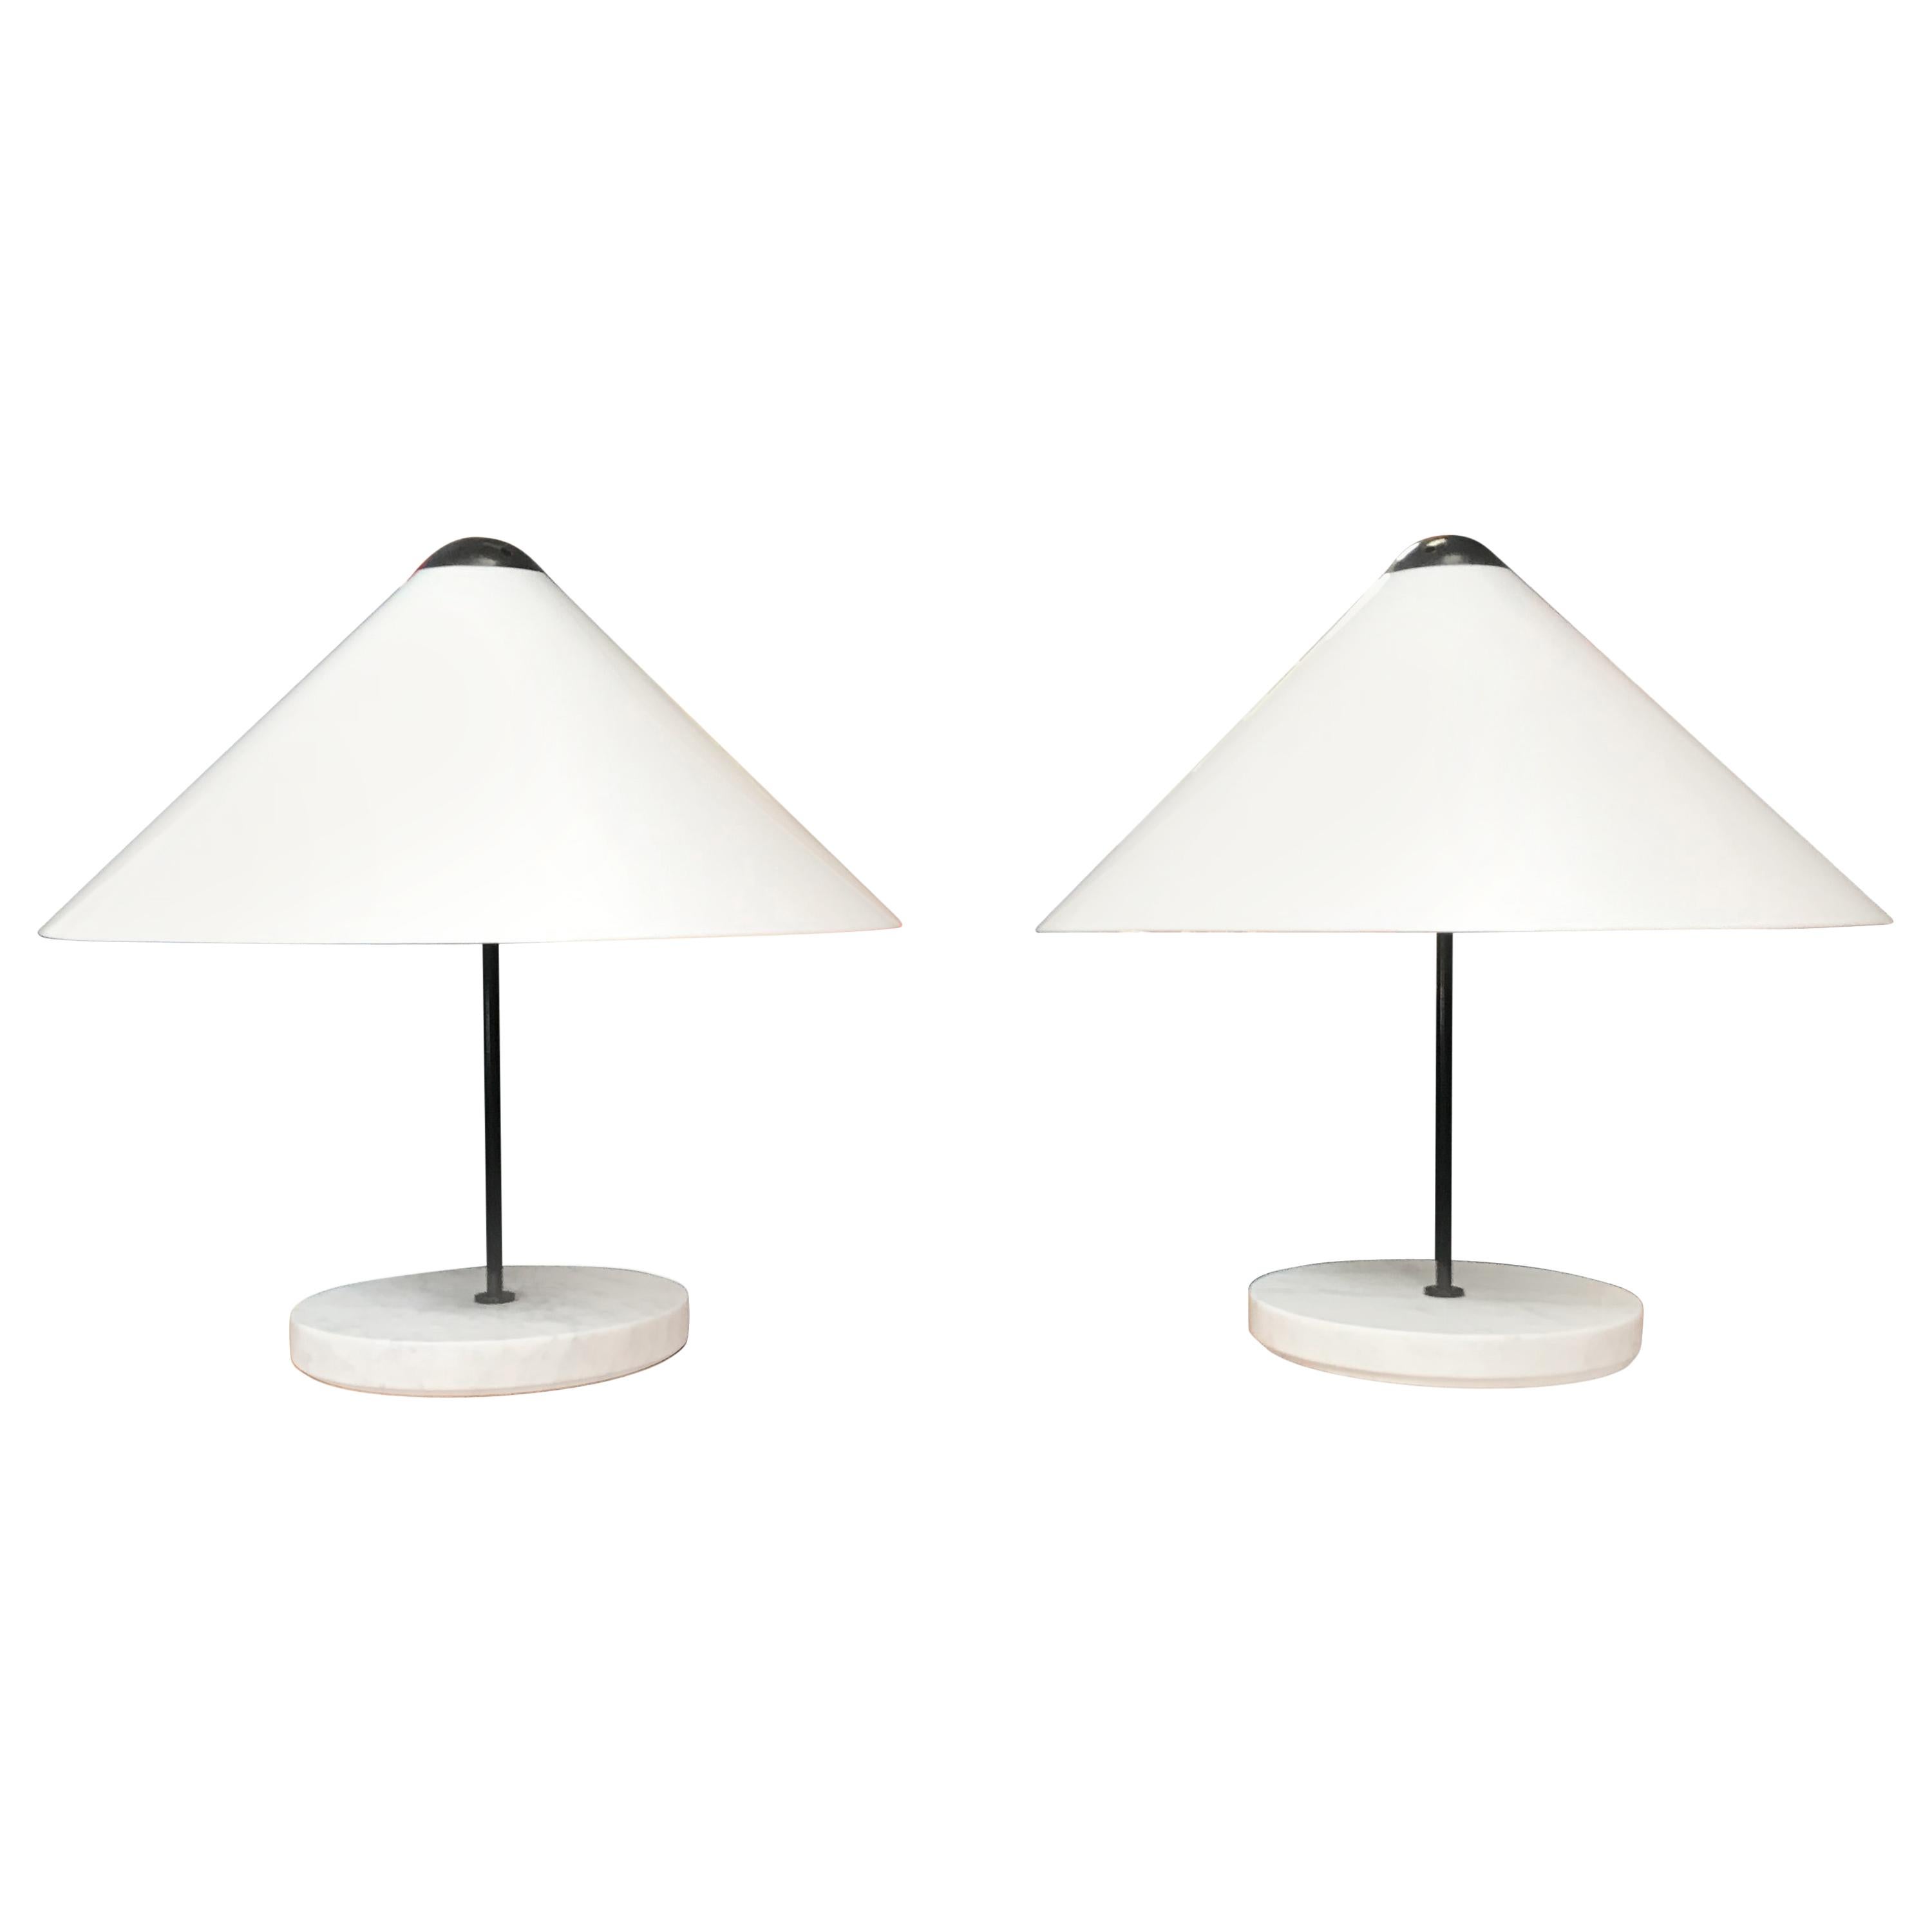 Pair of 'Snow' Italian Midcentury Table Lamps by Vico Magistretti for Oluce For Sale